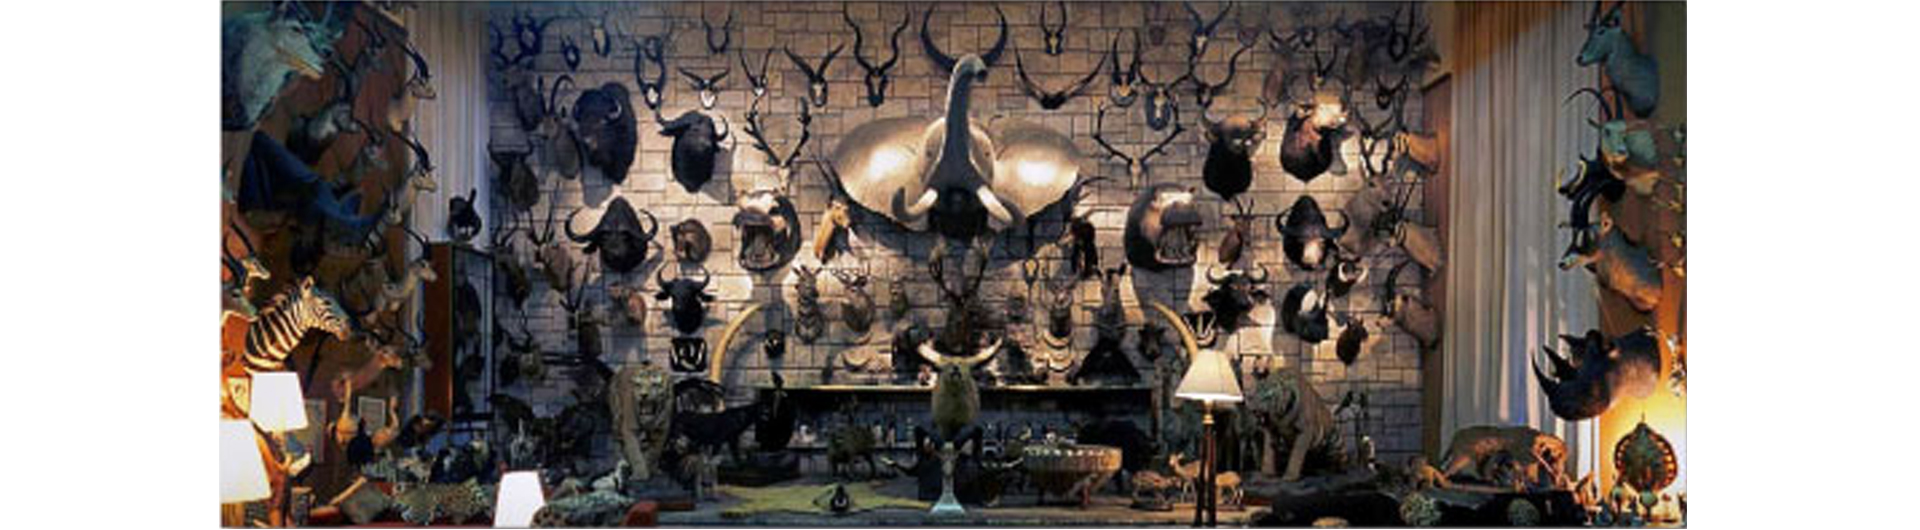 Photograph of a room with many mounted animal heads by Diego Lama